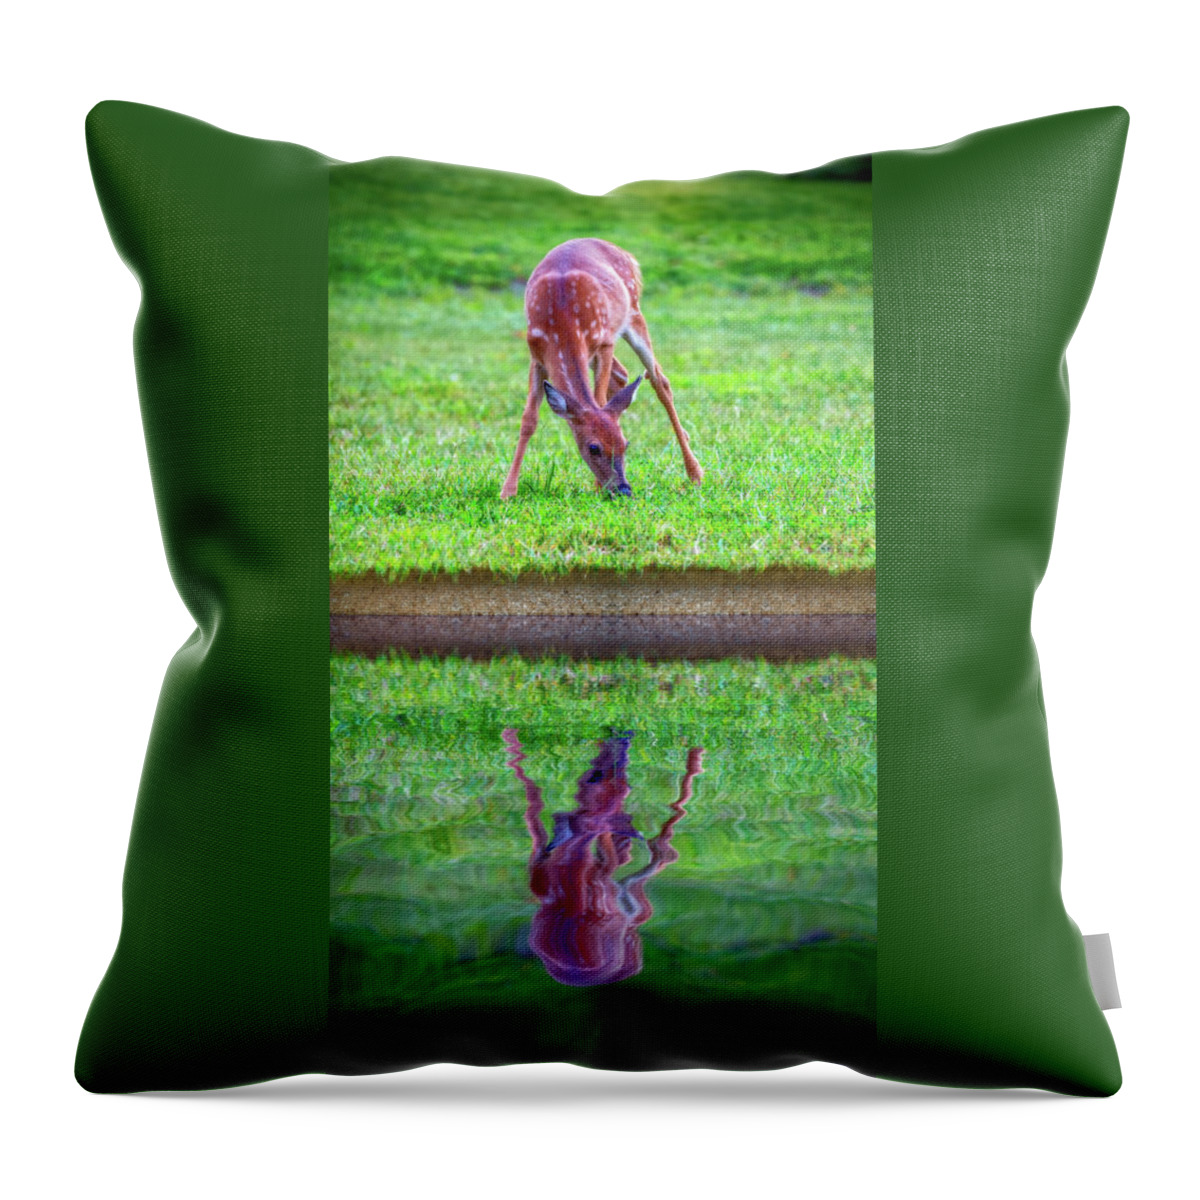 2d Throw Pillow featuring the photograph Grazing Reflection by Brian Wallace